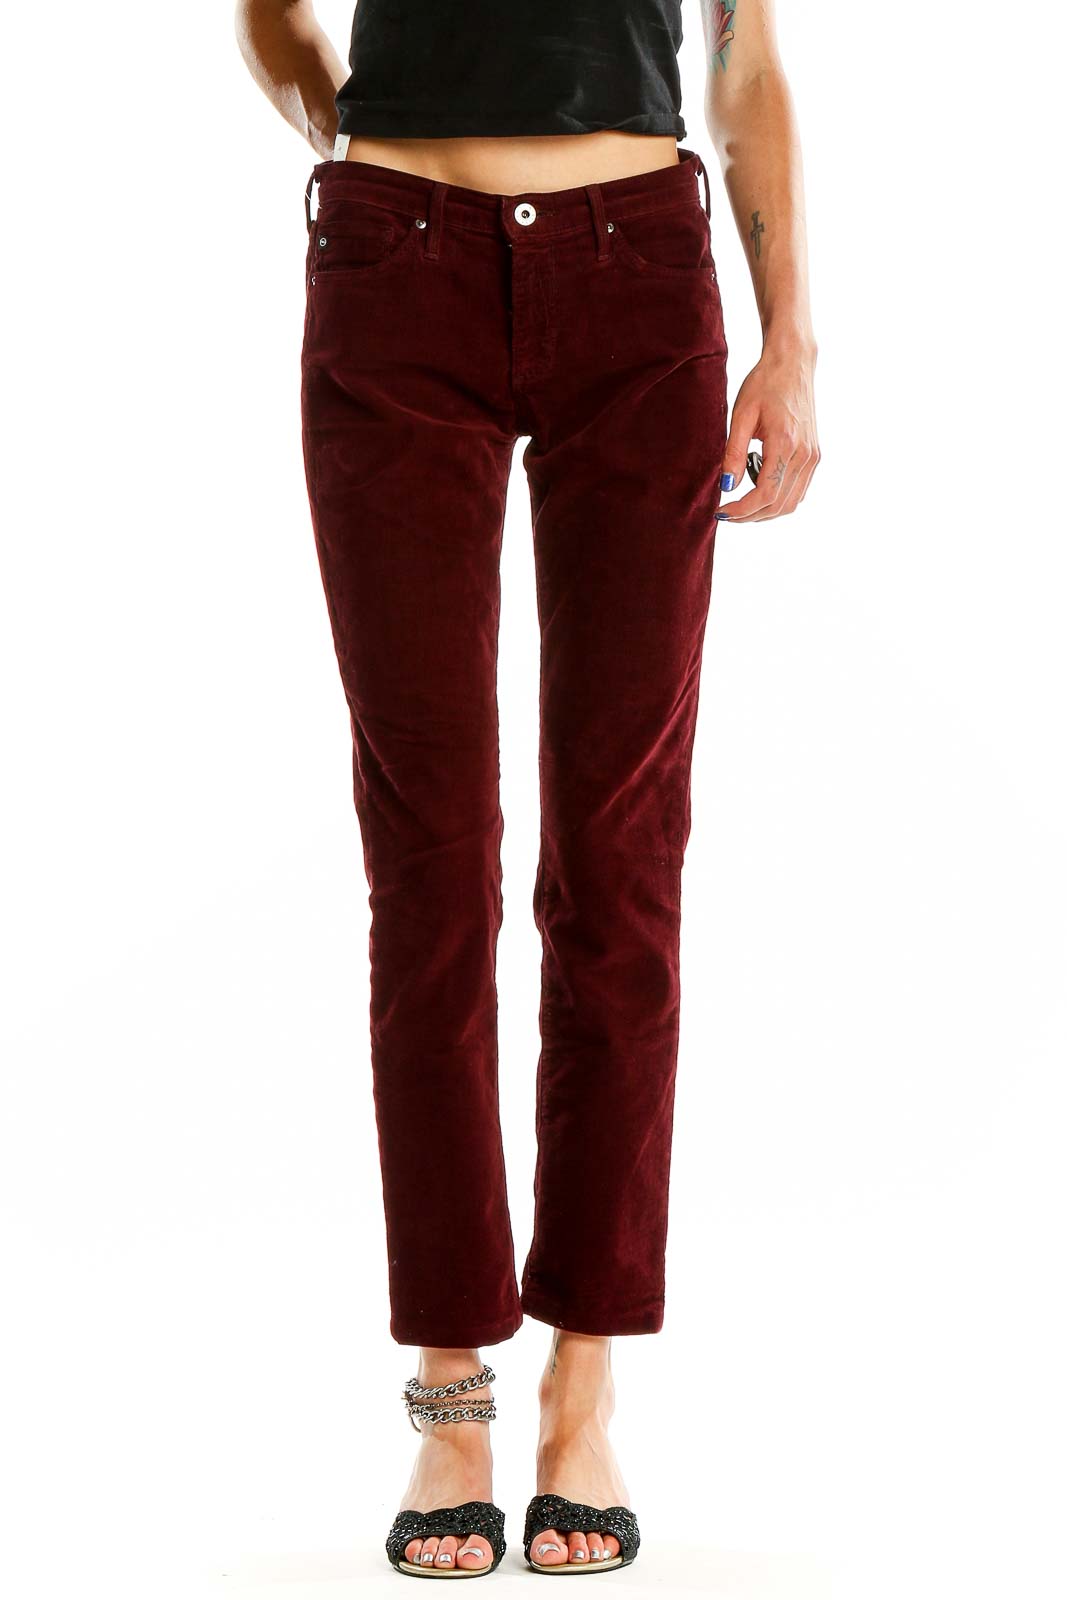 Red Corduroy Jeans Front